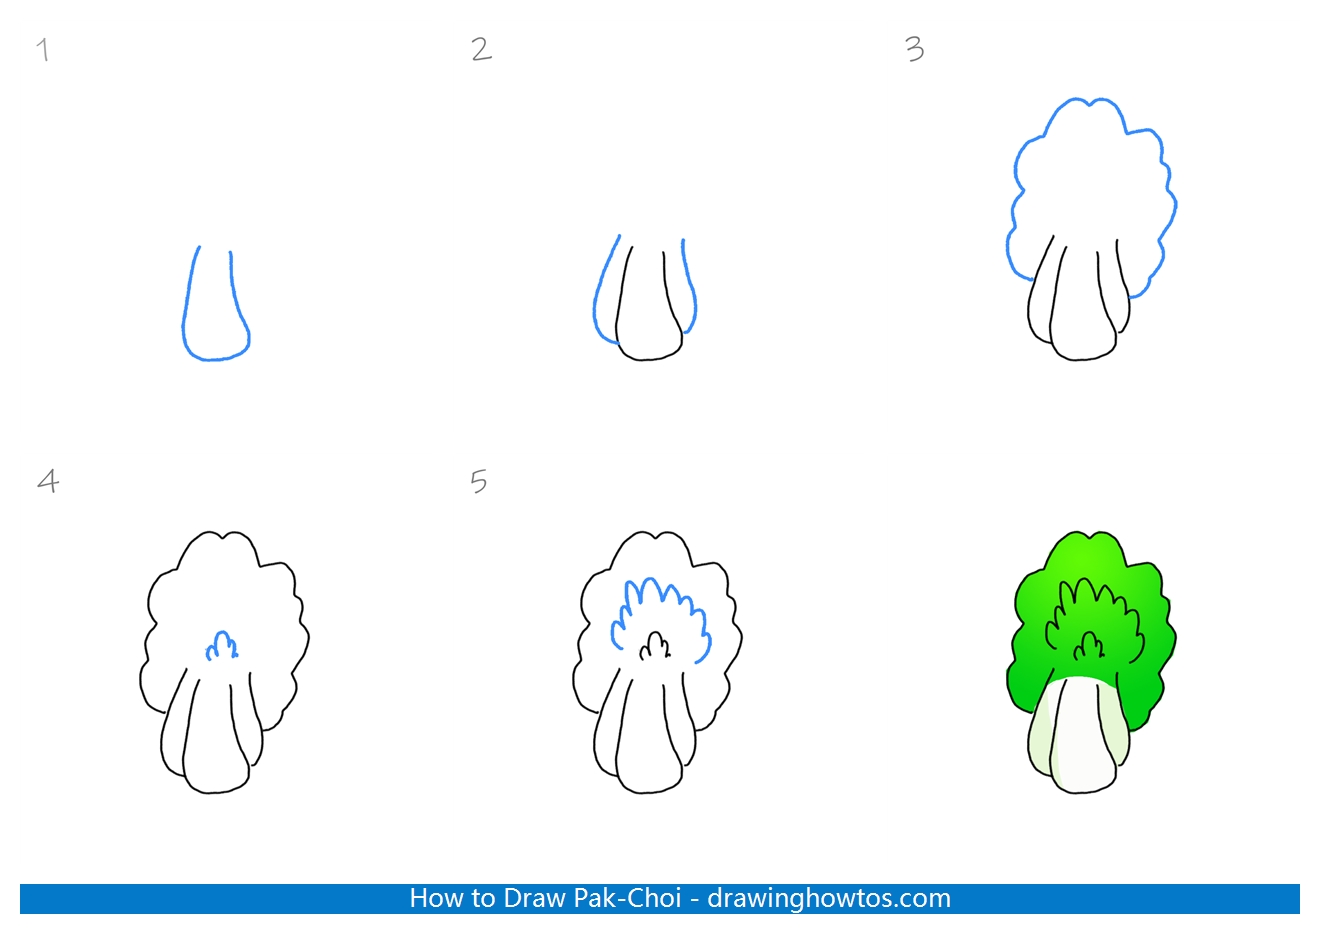 How to Draw Pak-Choi Step by Step